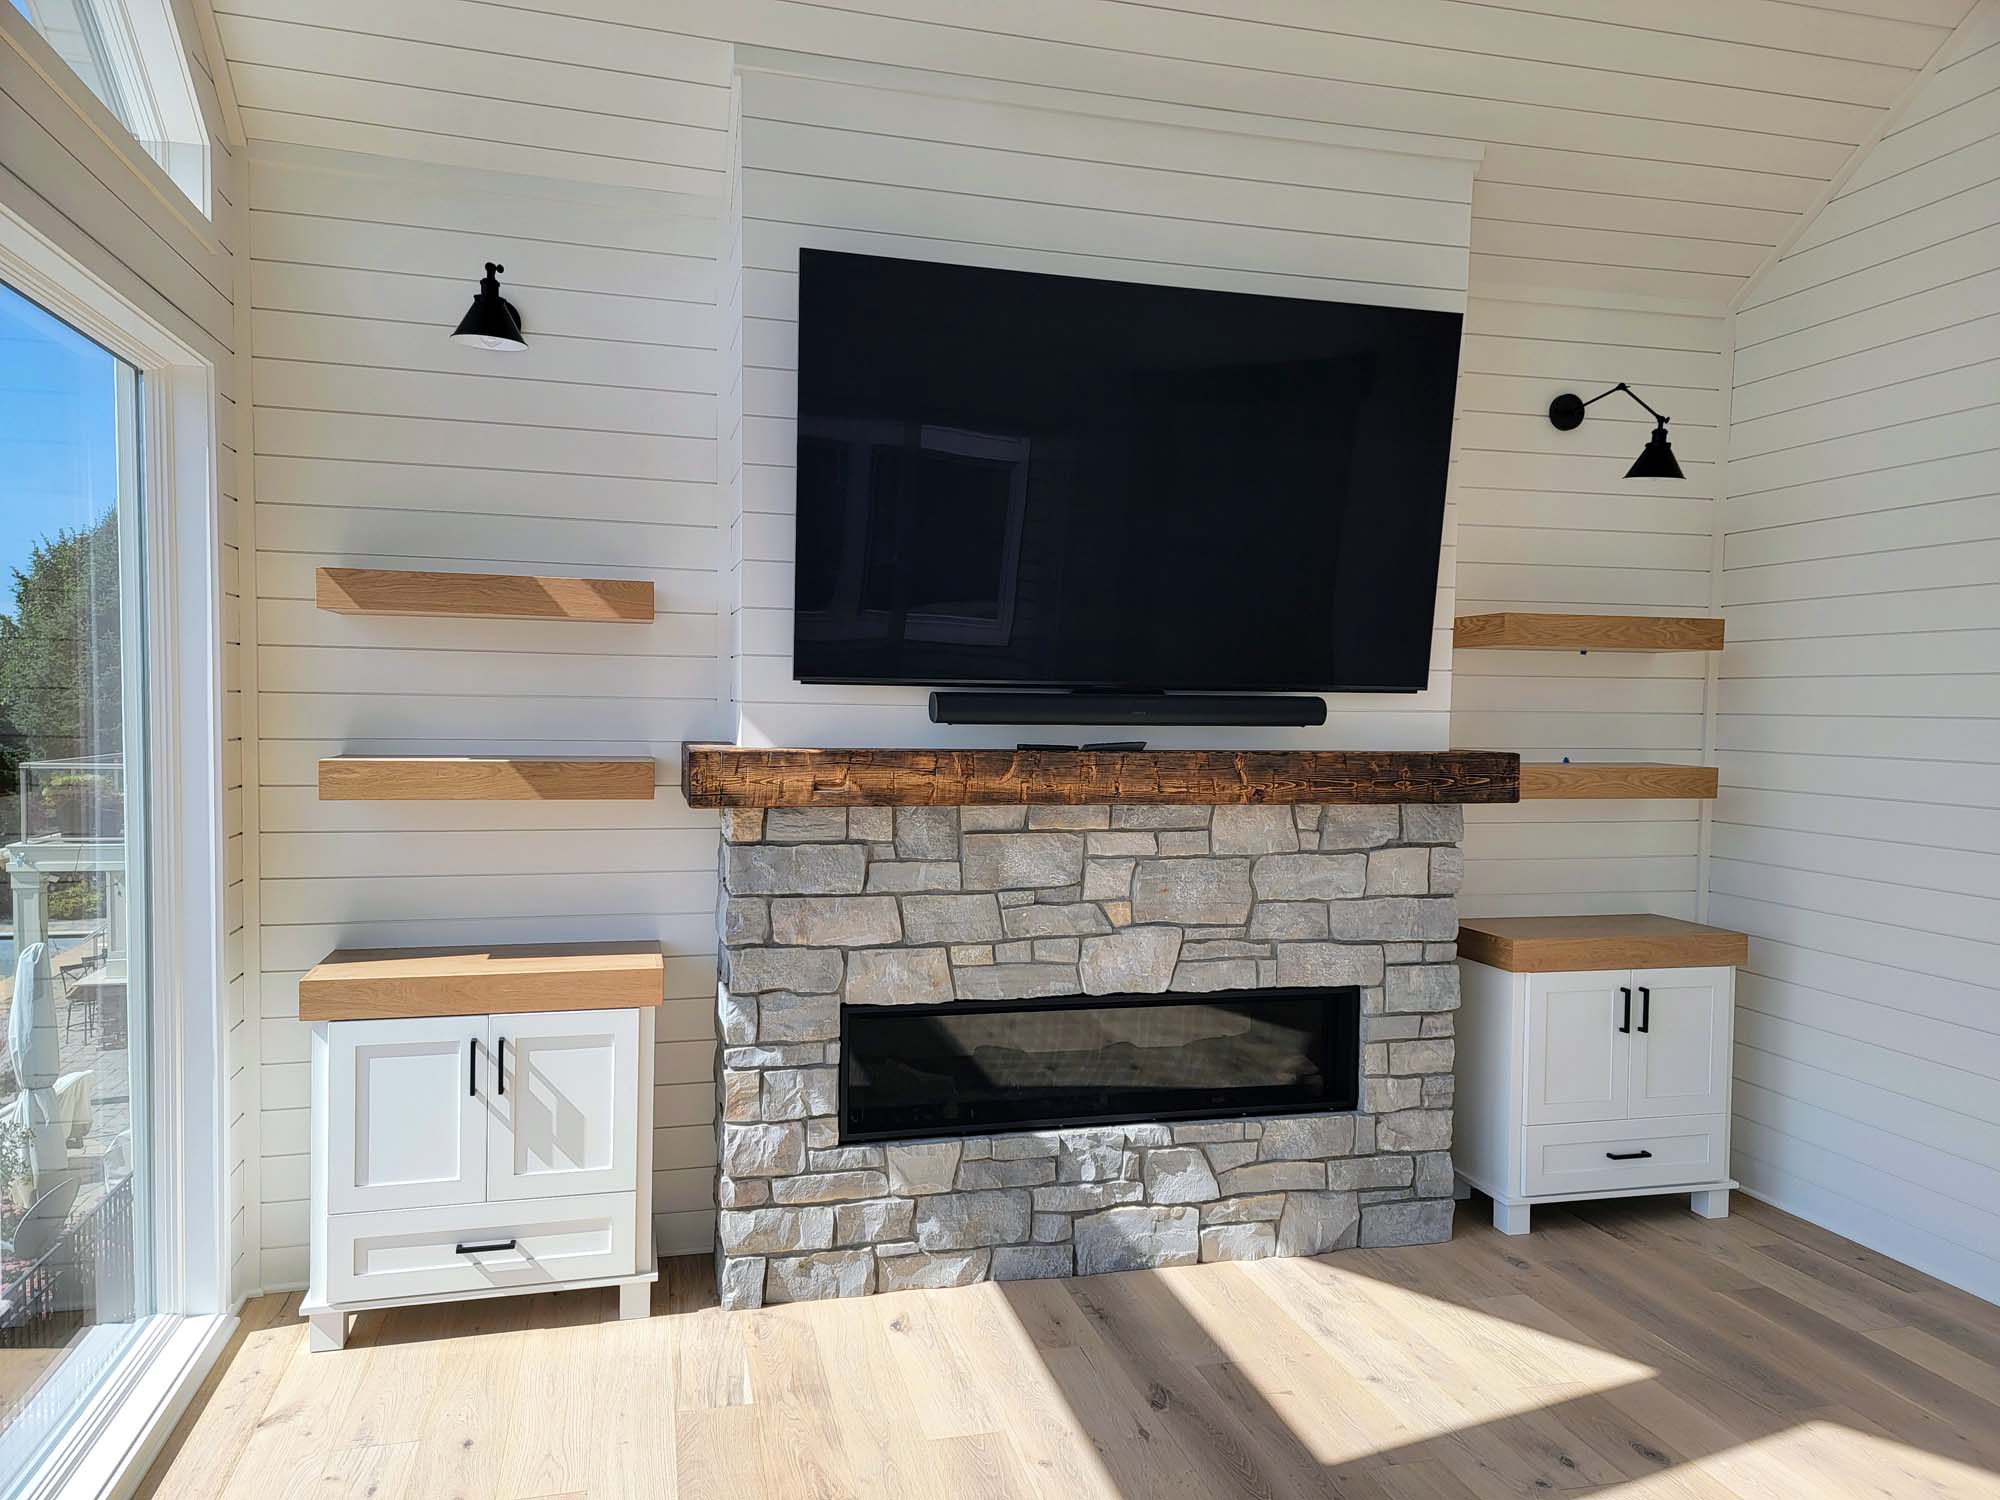 Media wall with TV, fireplace, shelves and custom cabinets